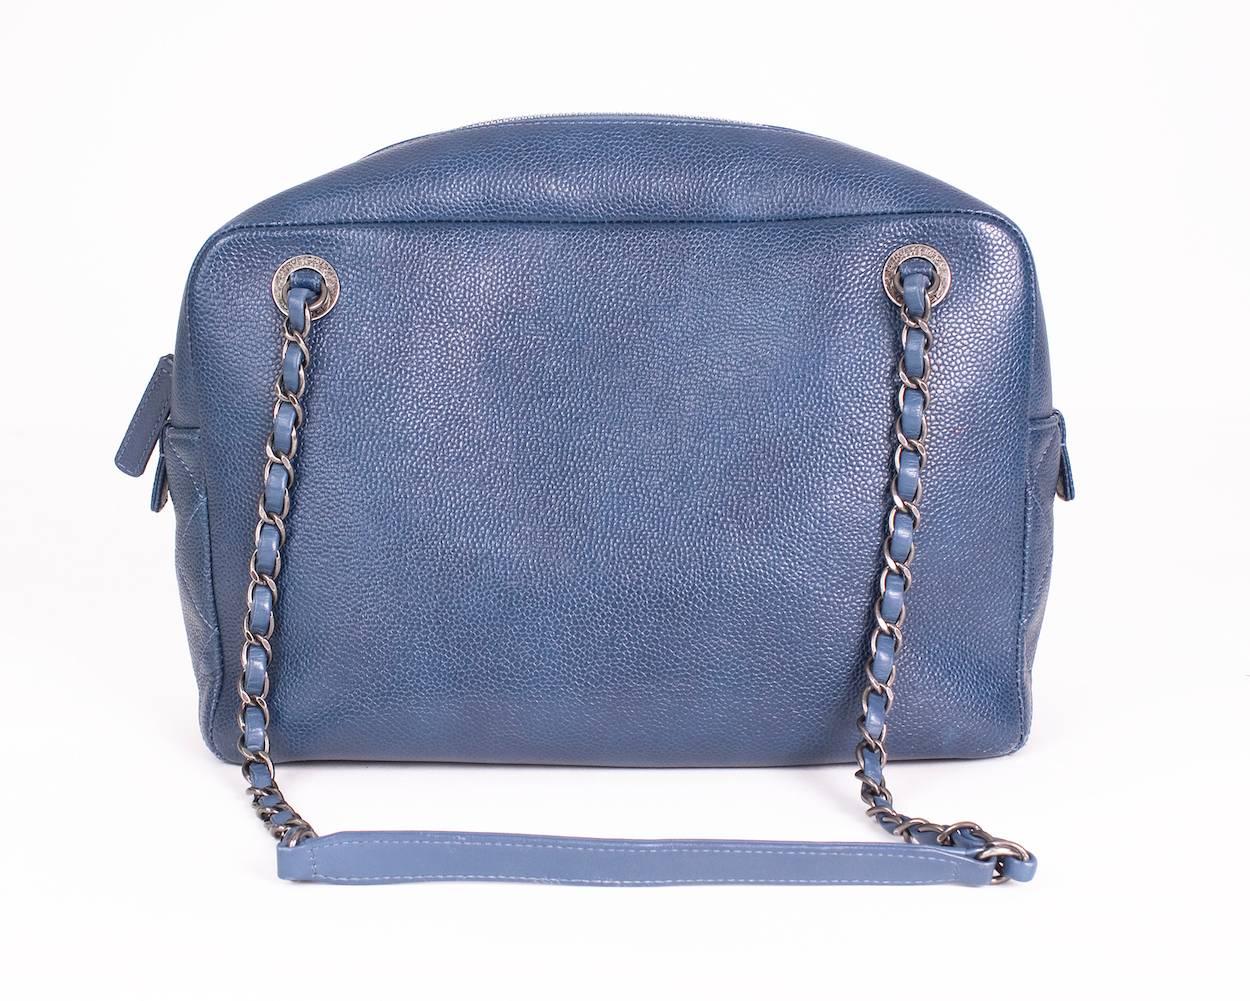 This is a blue leather Chanel camera bag from 2016.  It is made from quilted and pebbled leather and features an outside flap pocket with a magnetic snap closure as well as antique silver hardware. 
11